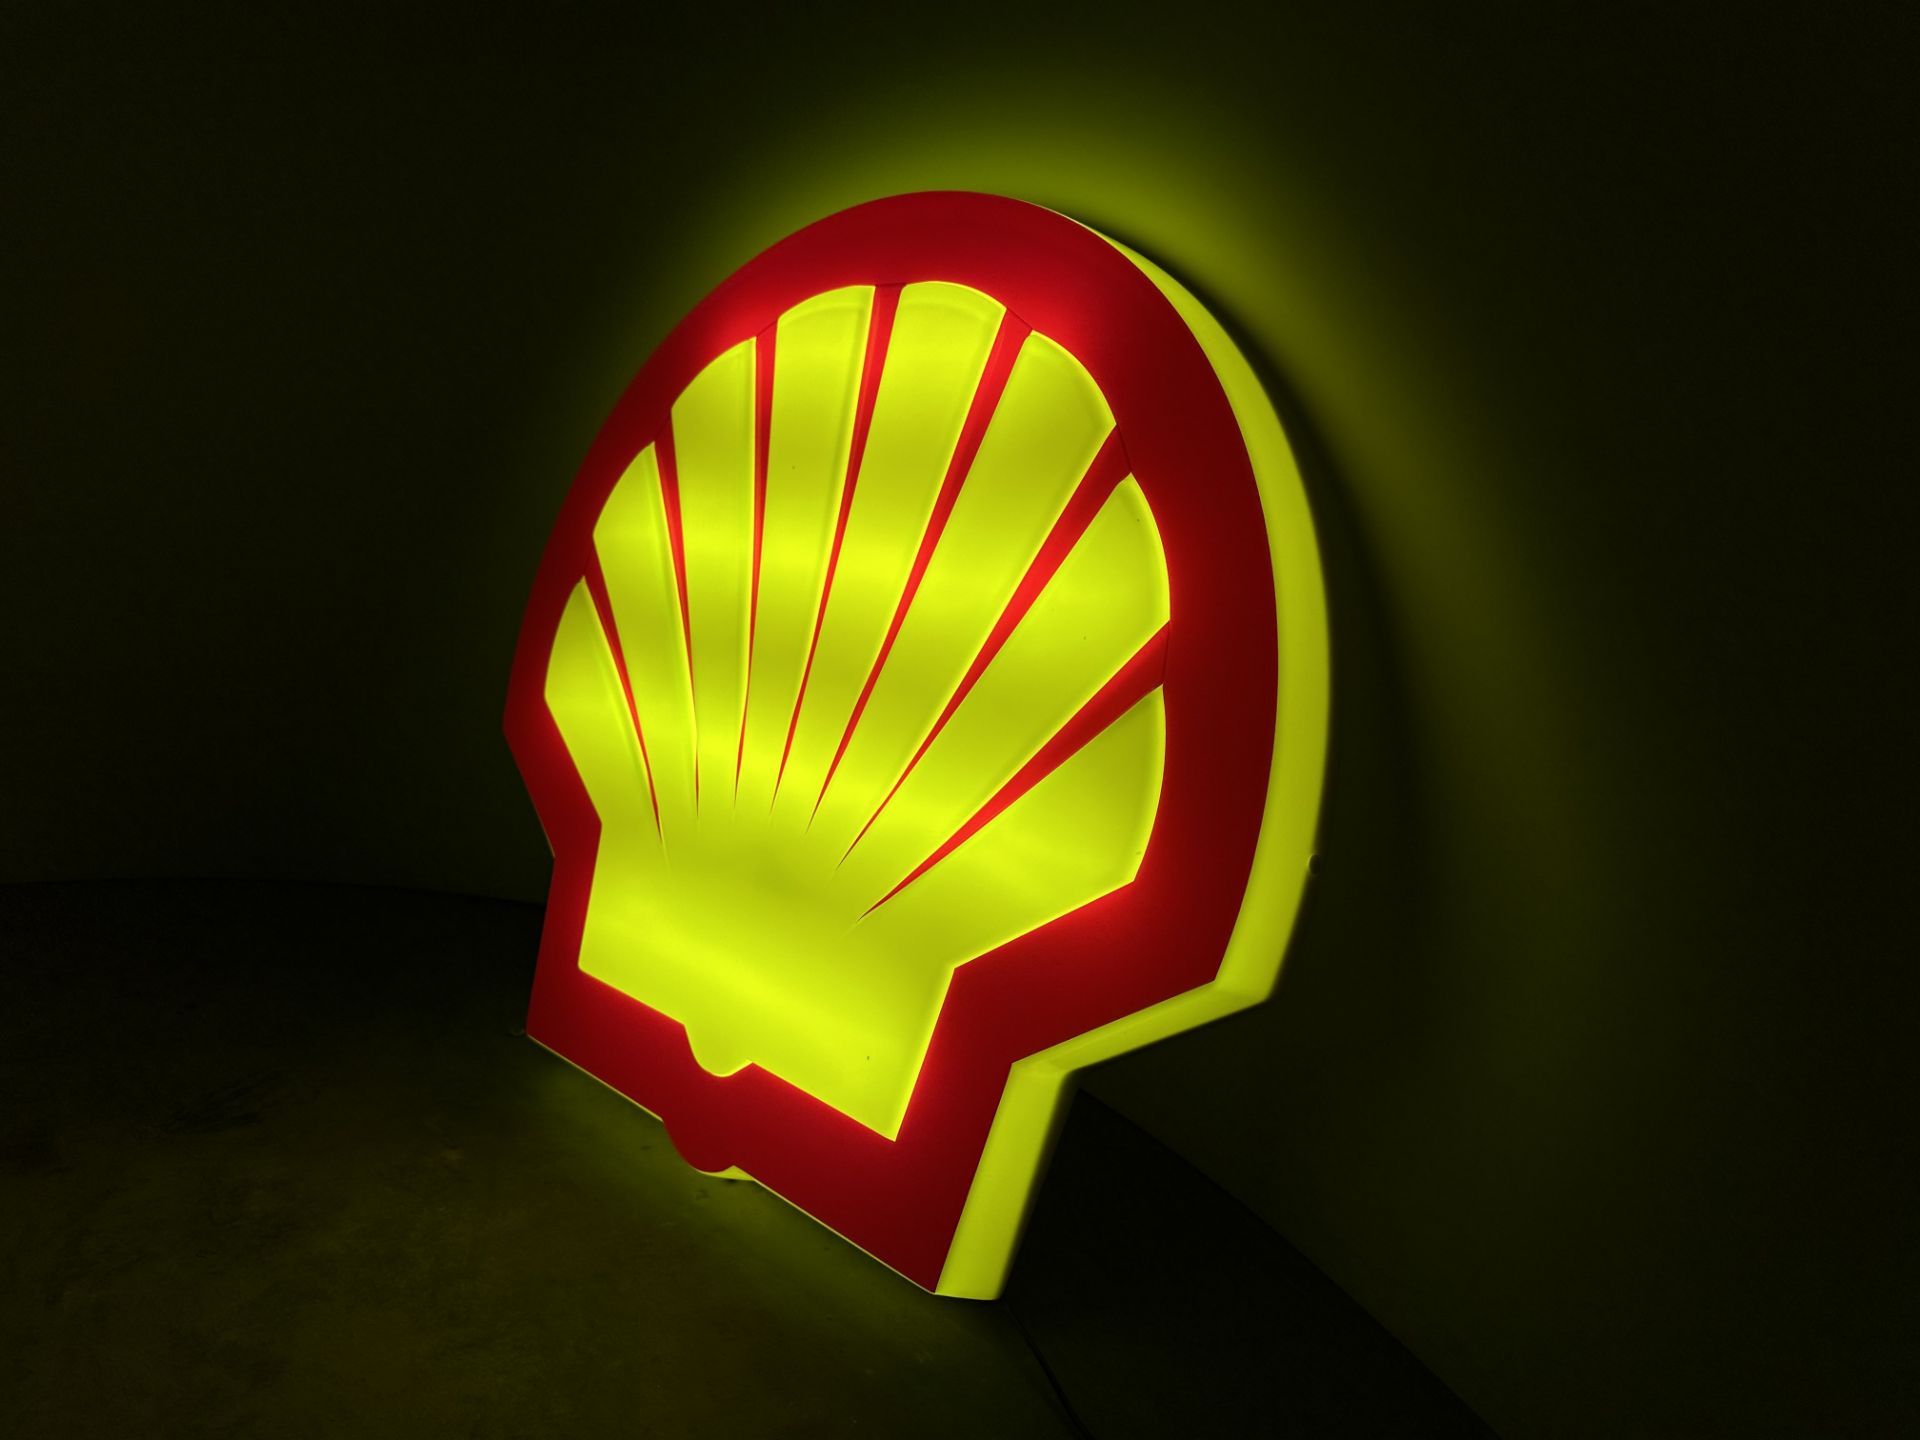 Shell illumination sign works in any country